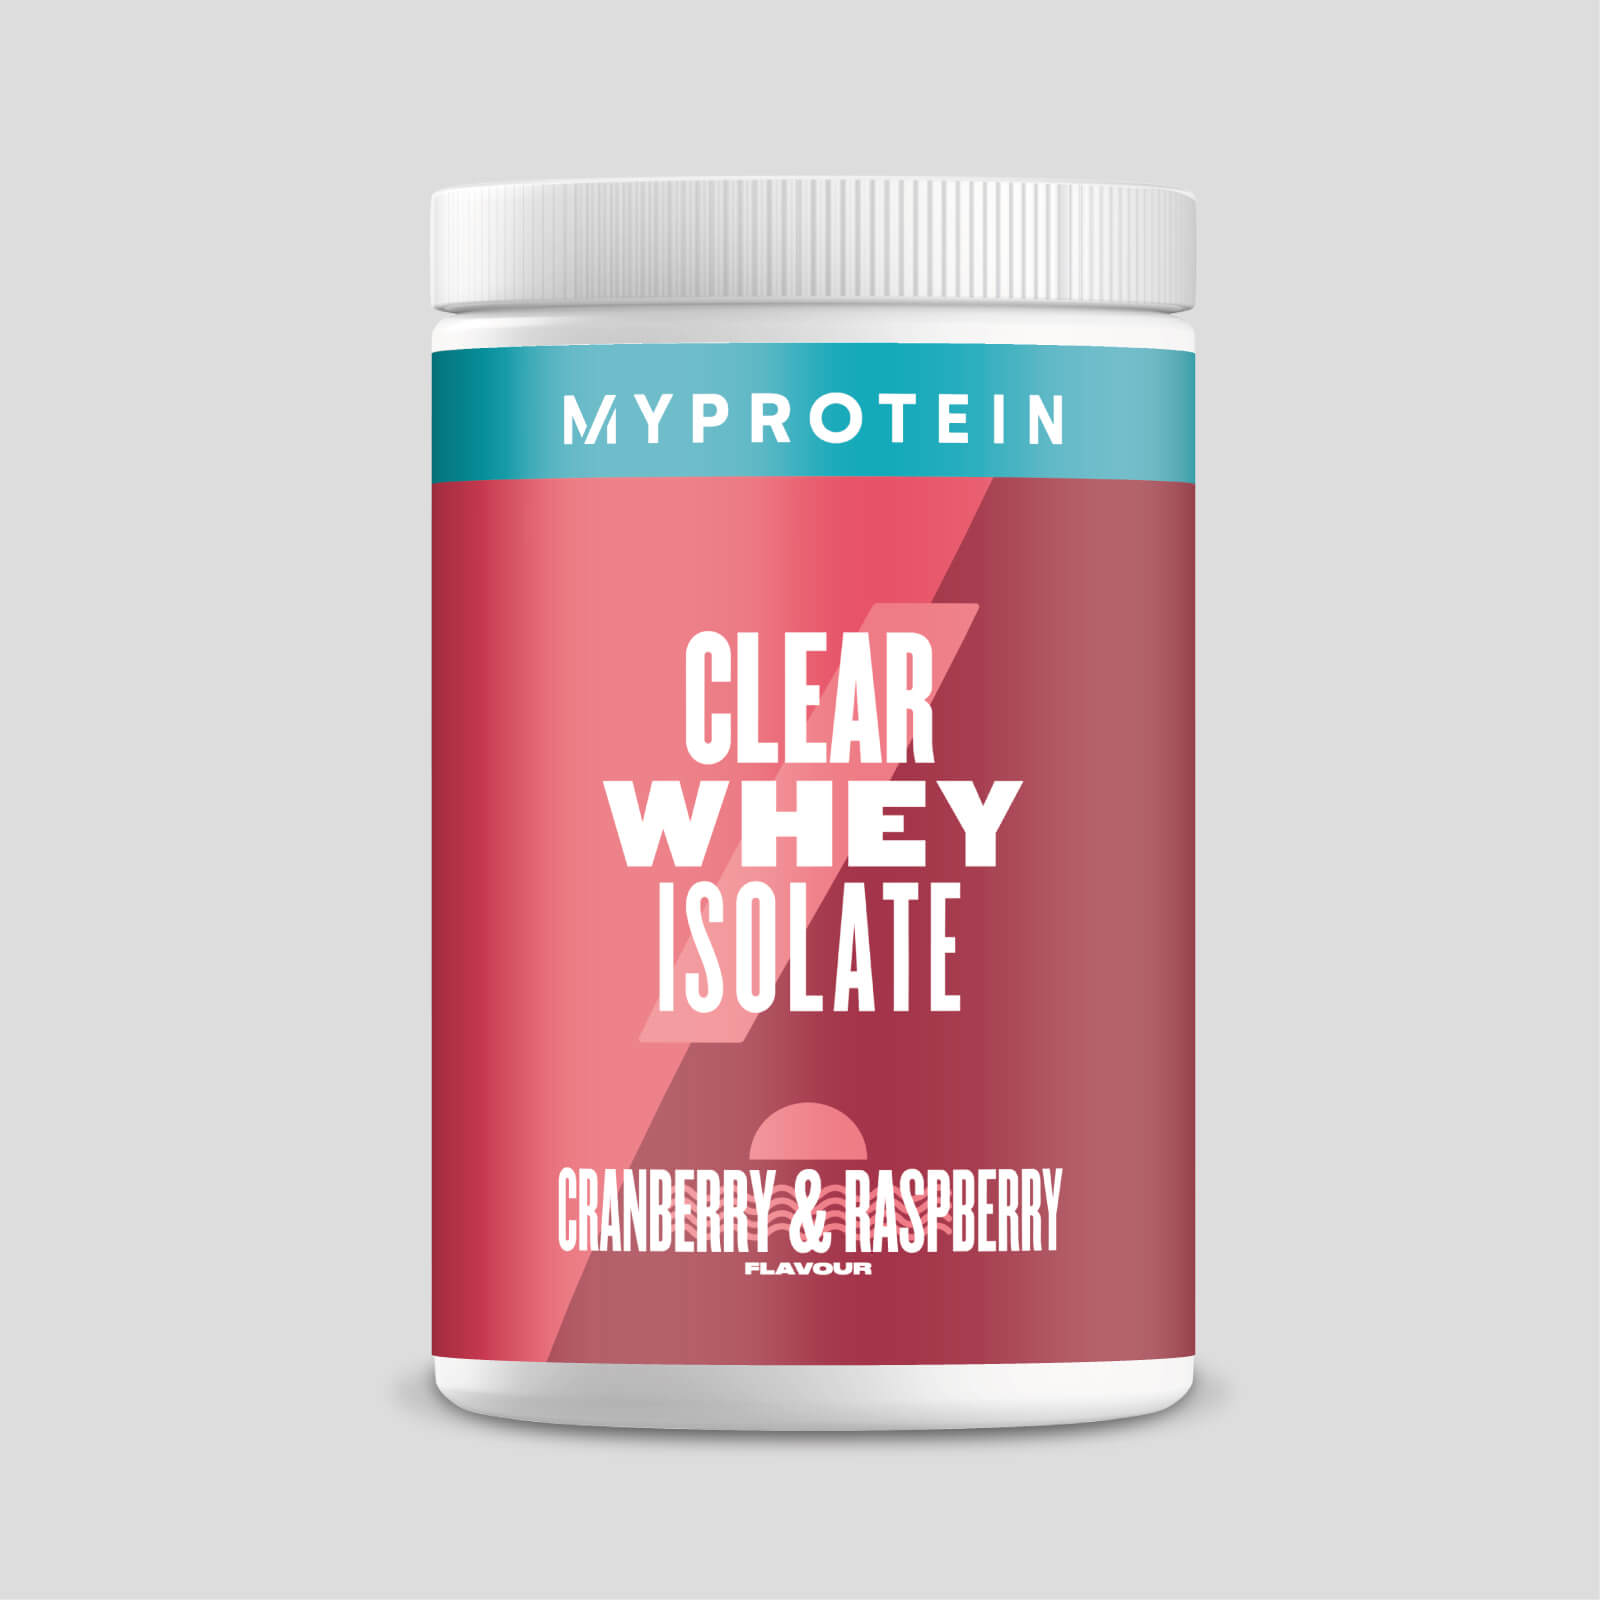 Myprotein Clear Whey Proteín - 20servings - Cranberry & Raspberry